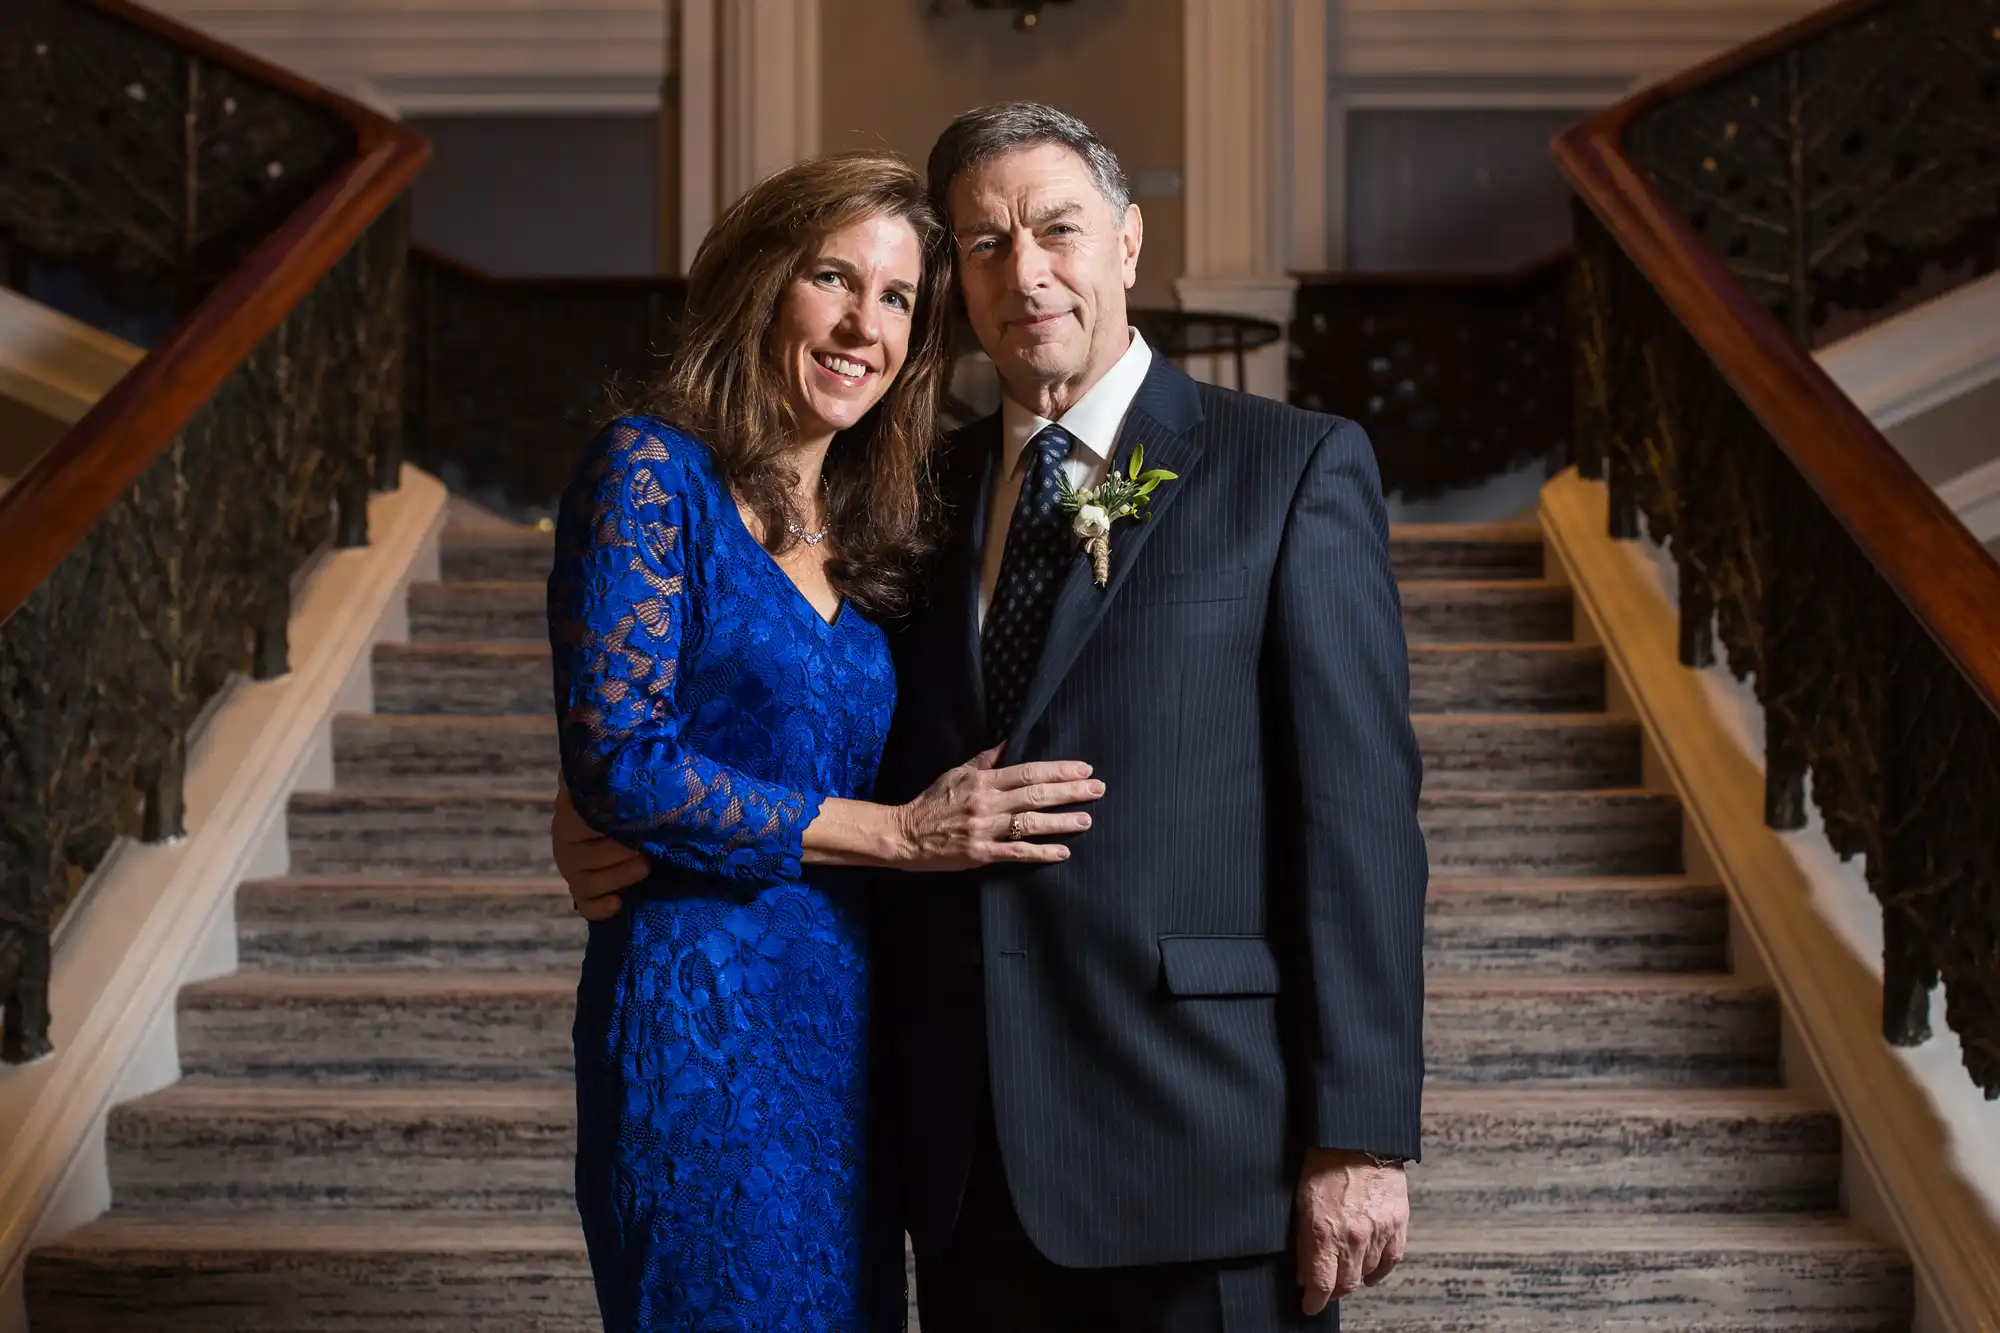 An elderly man in a suit and a woman in a blue dress smiling and posing together on a grand staircase.